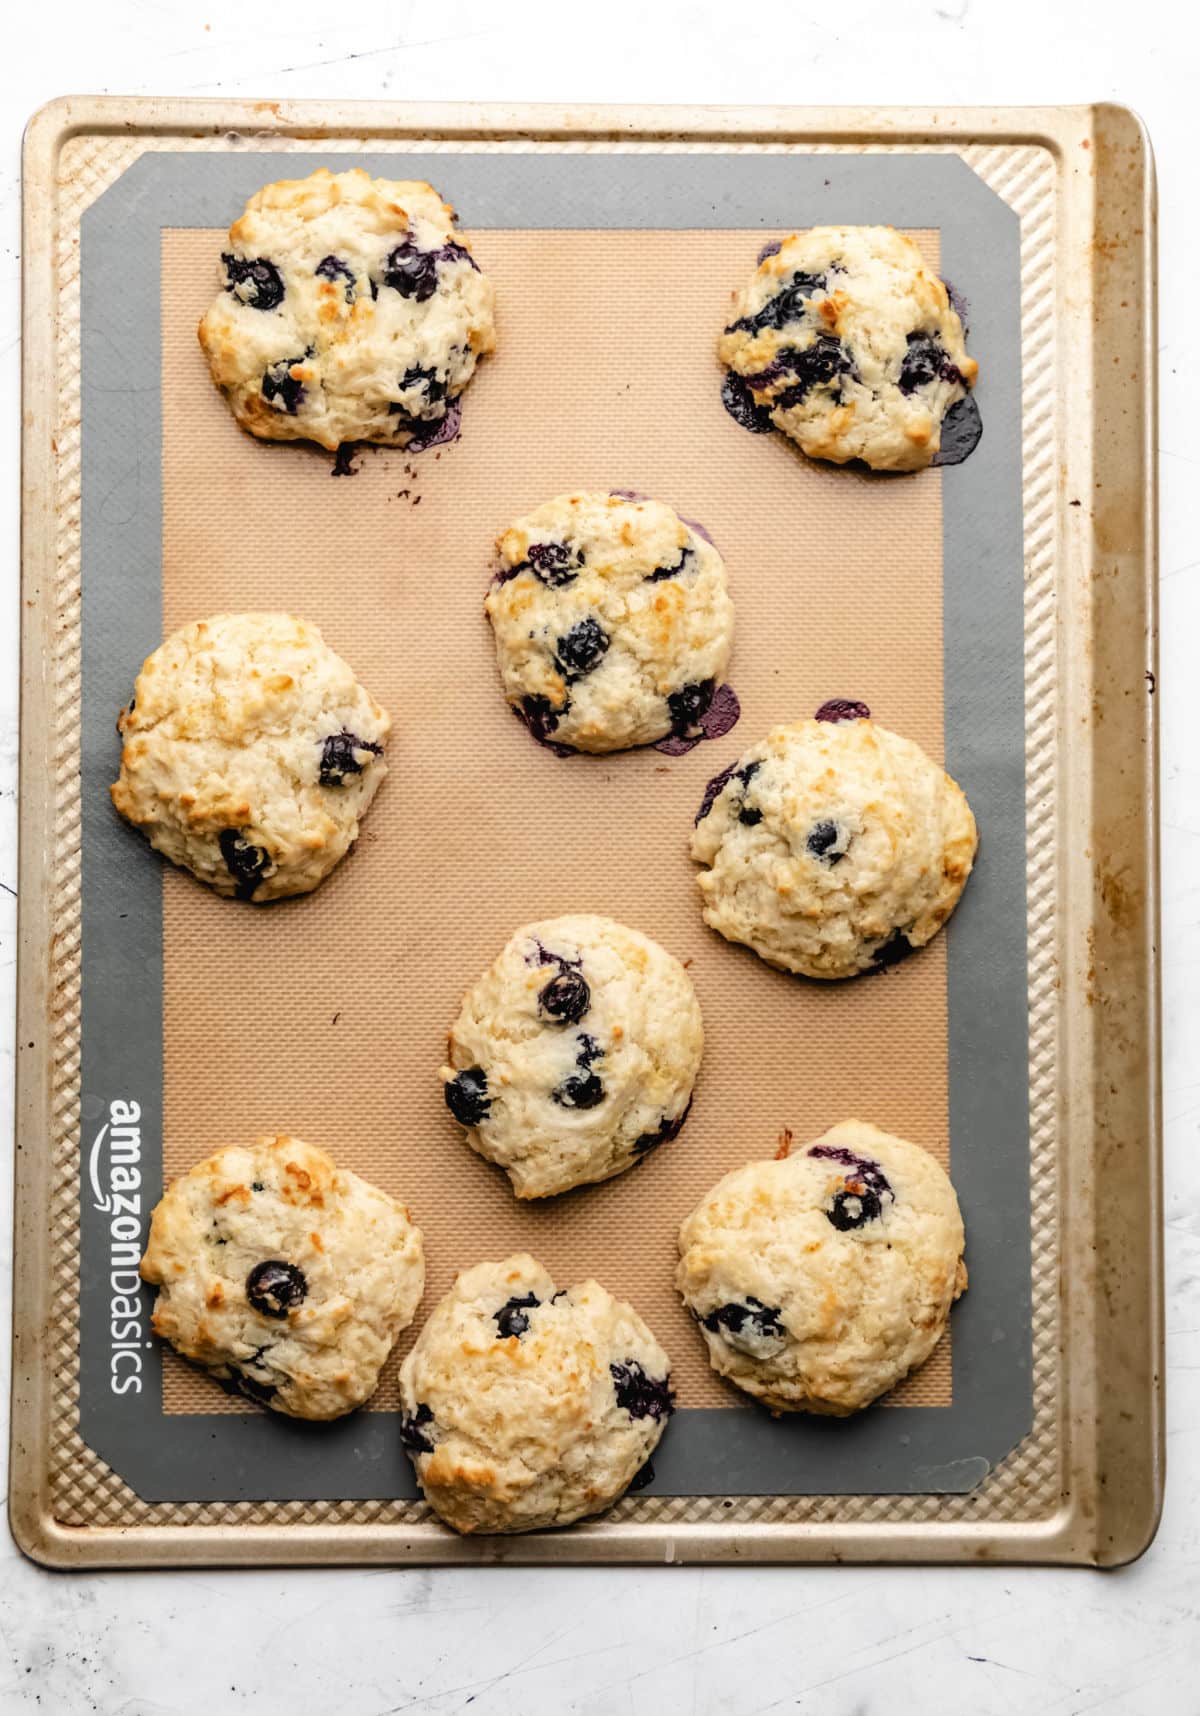 Baked blueberry biscuits on a baking sheet. 